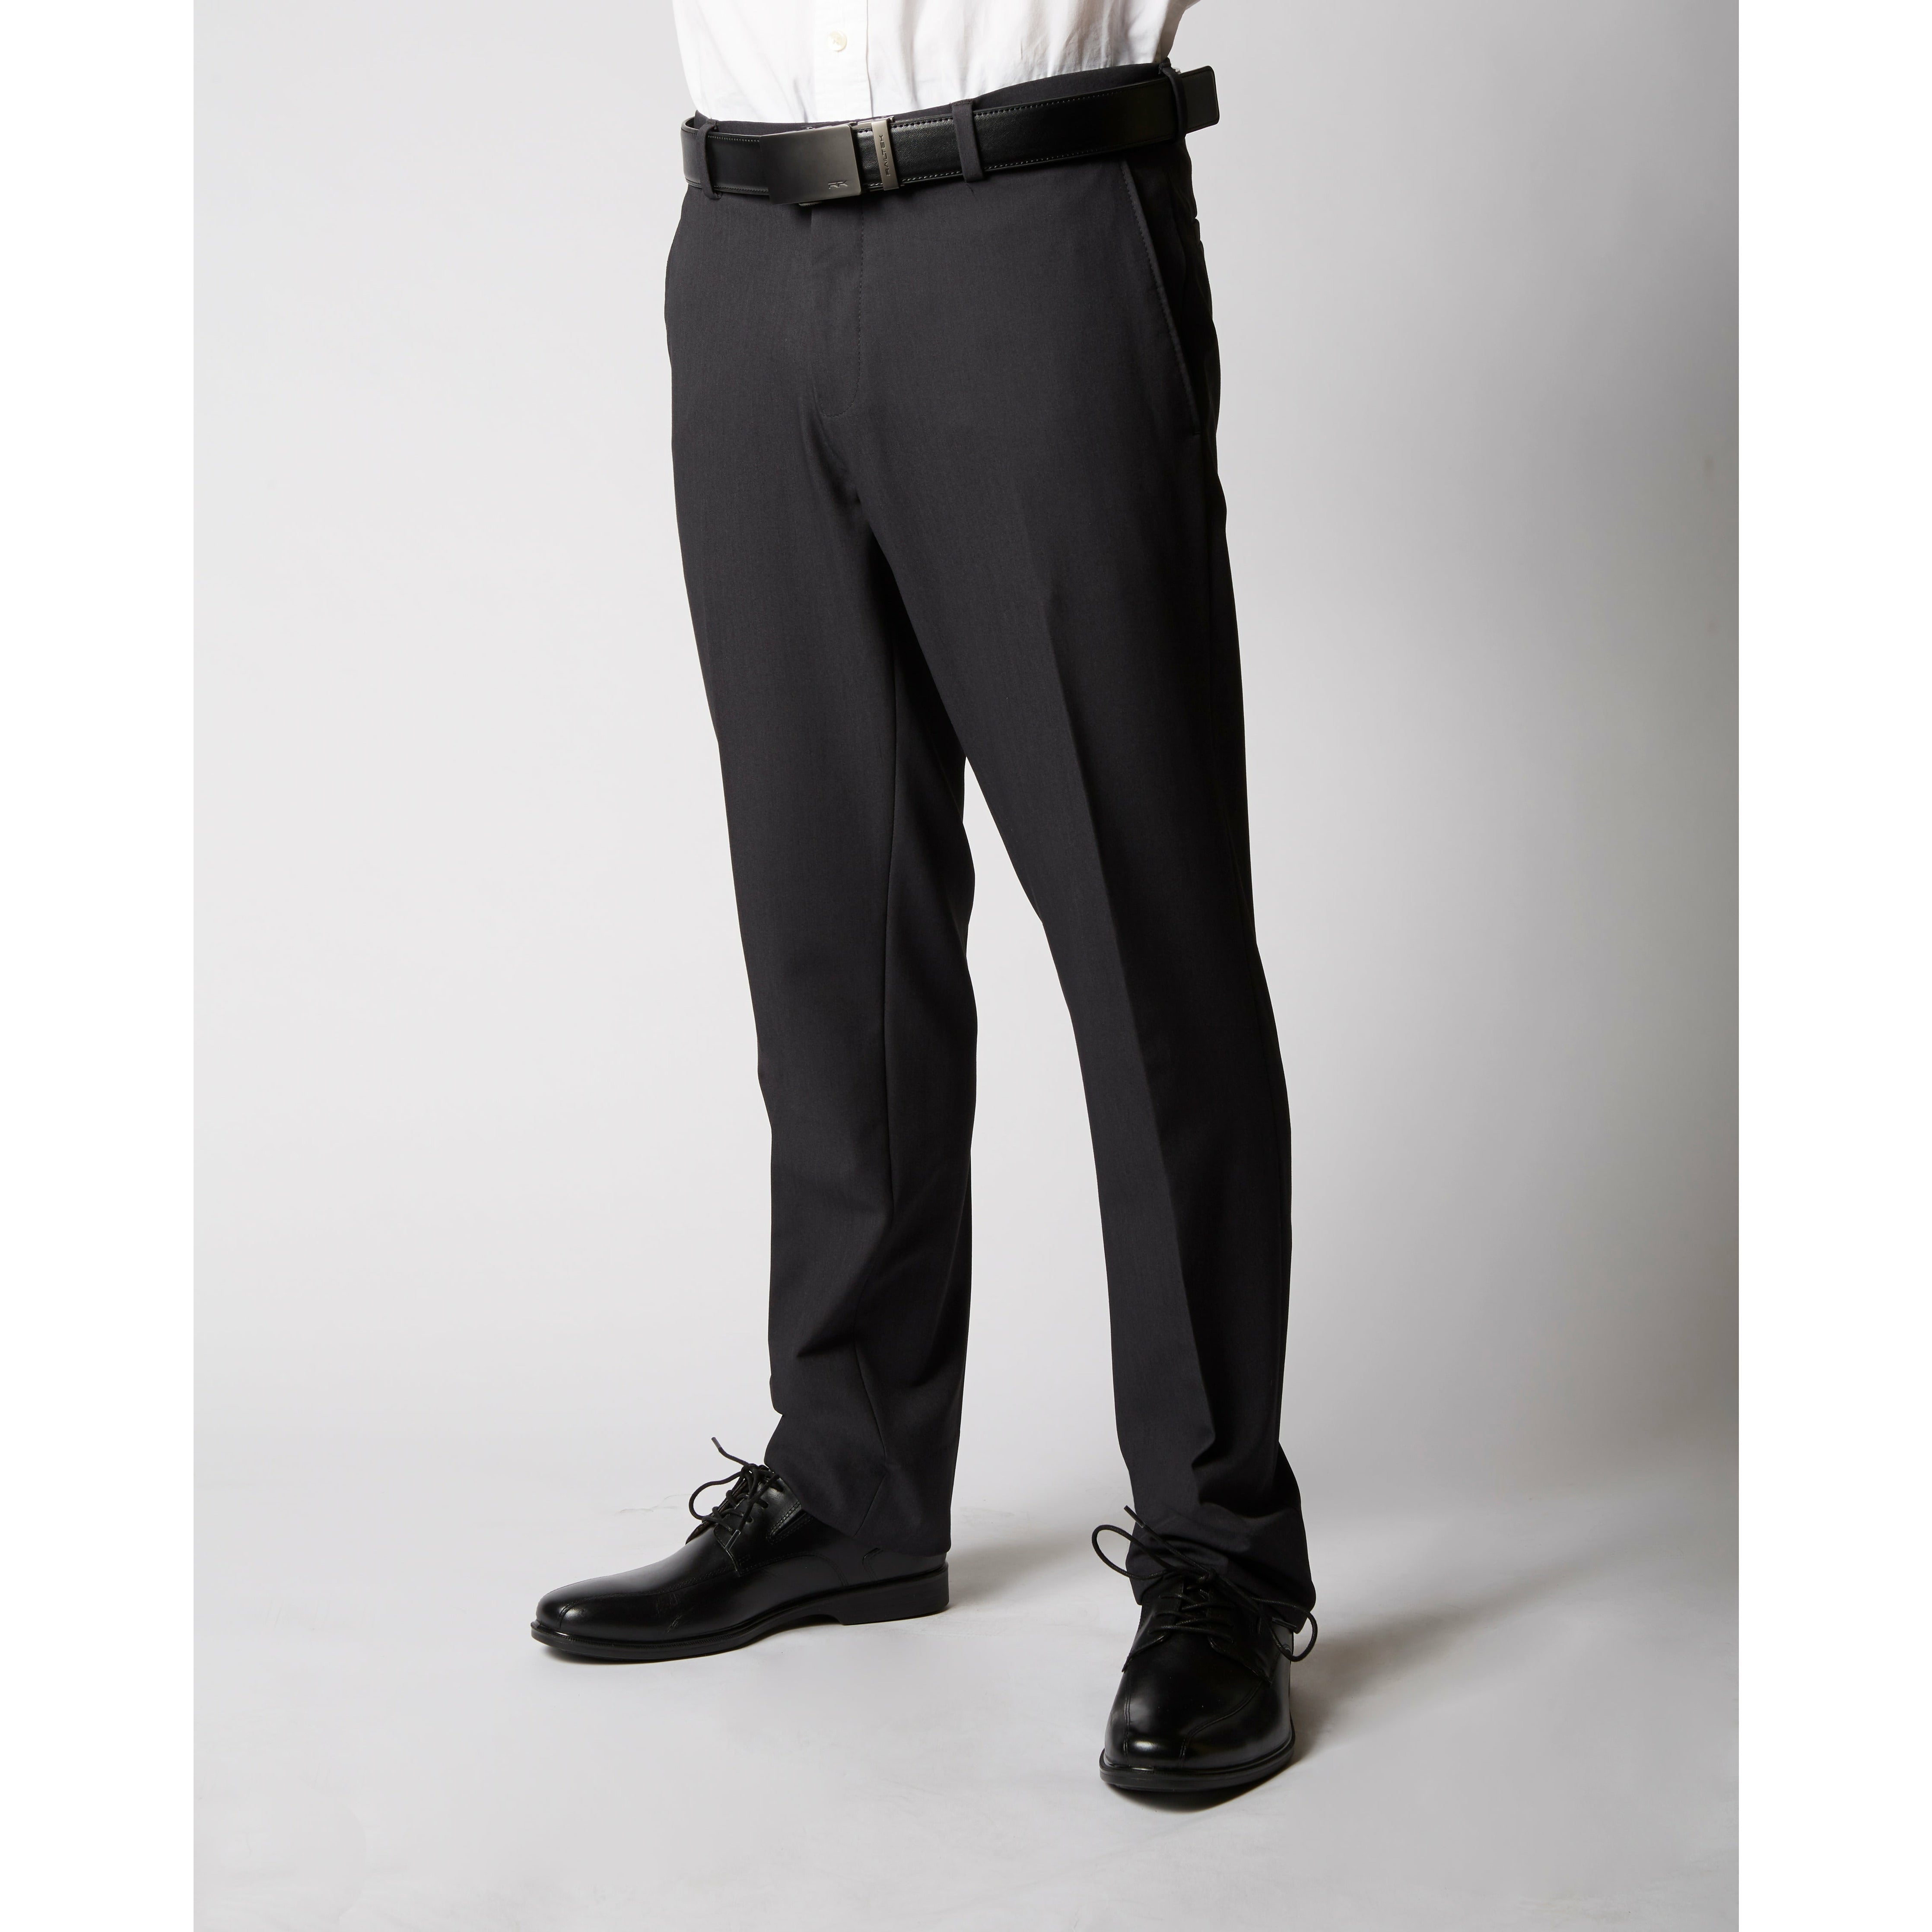 fcity.in - Readymade Traditional Trousers For Men / Comfy Men Trousers